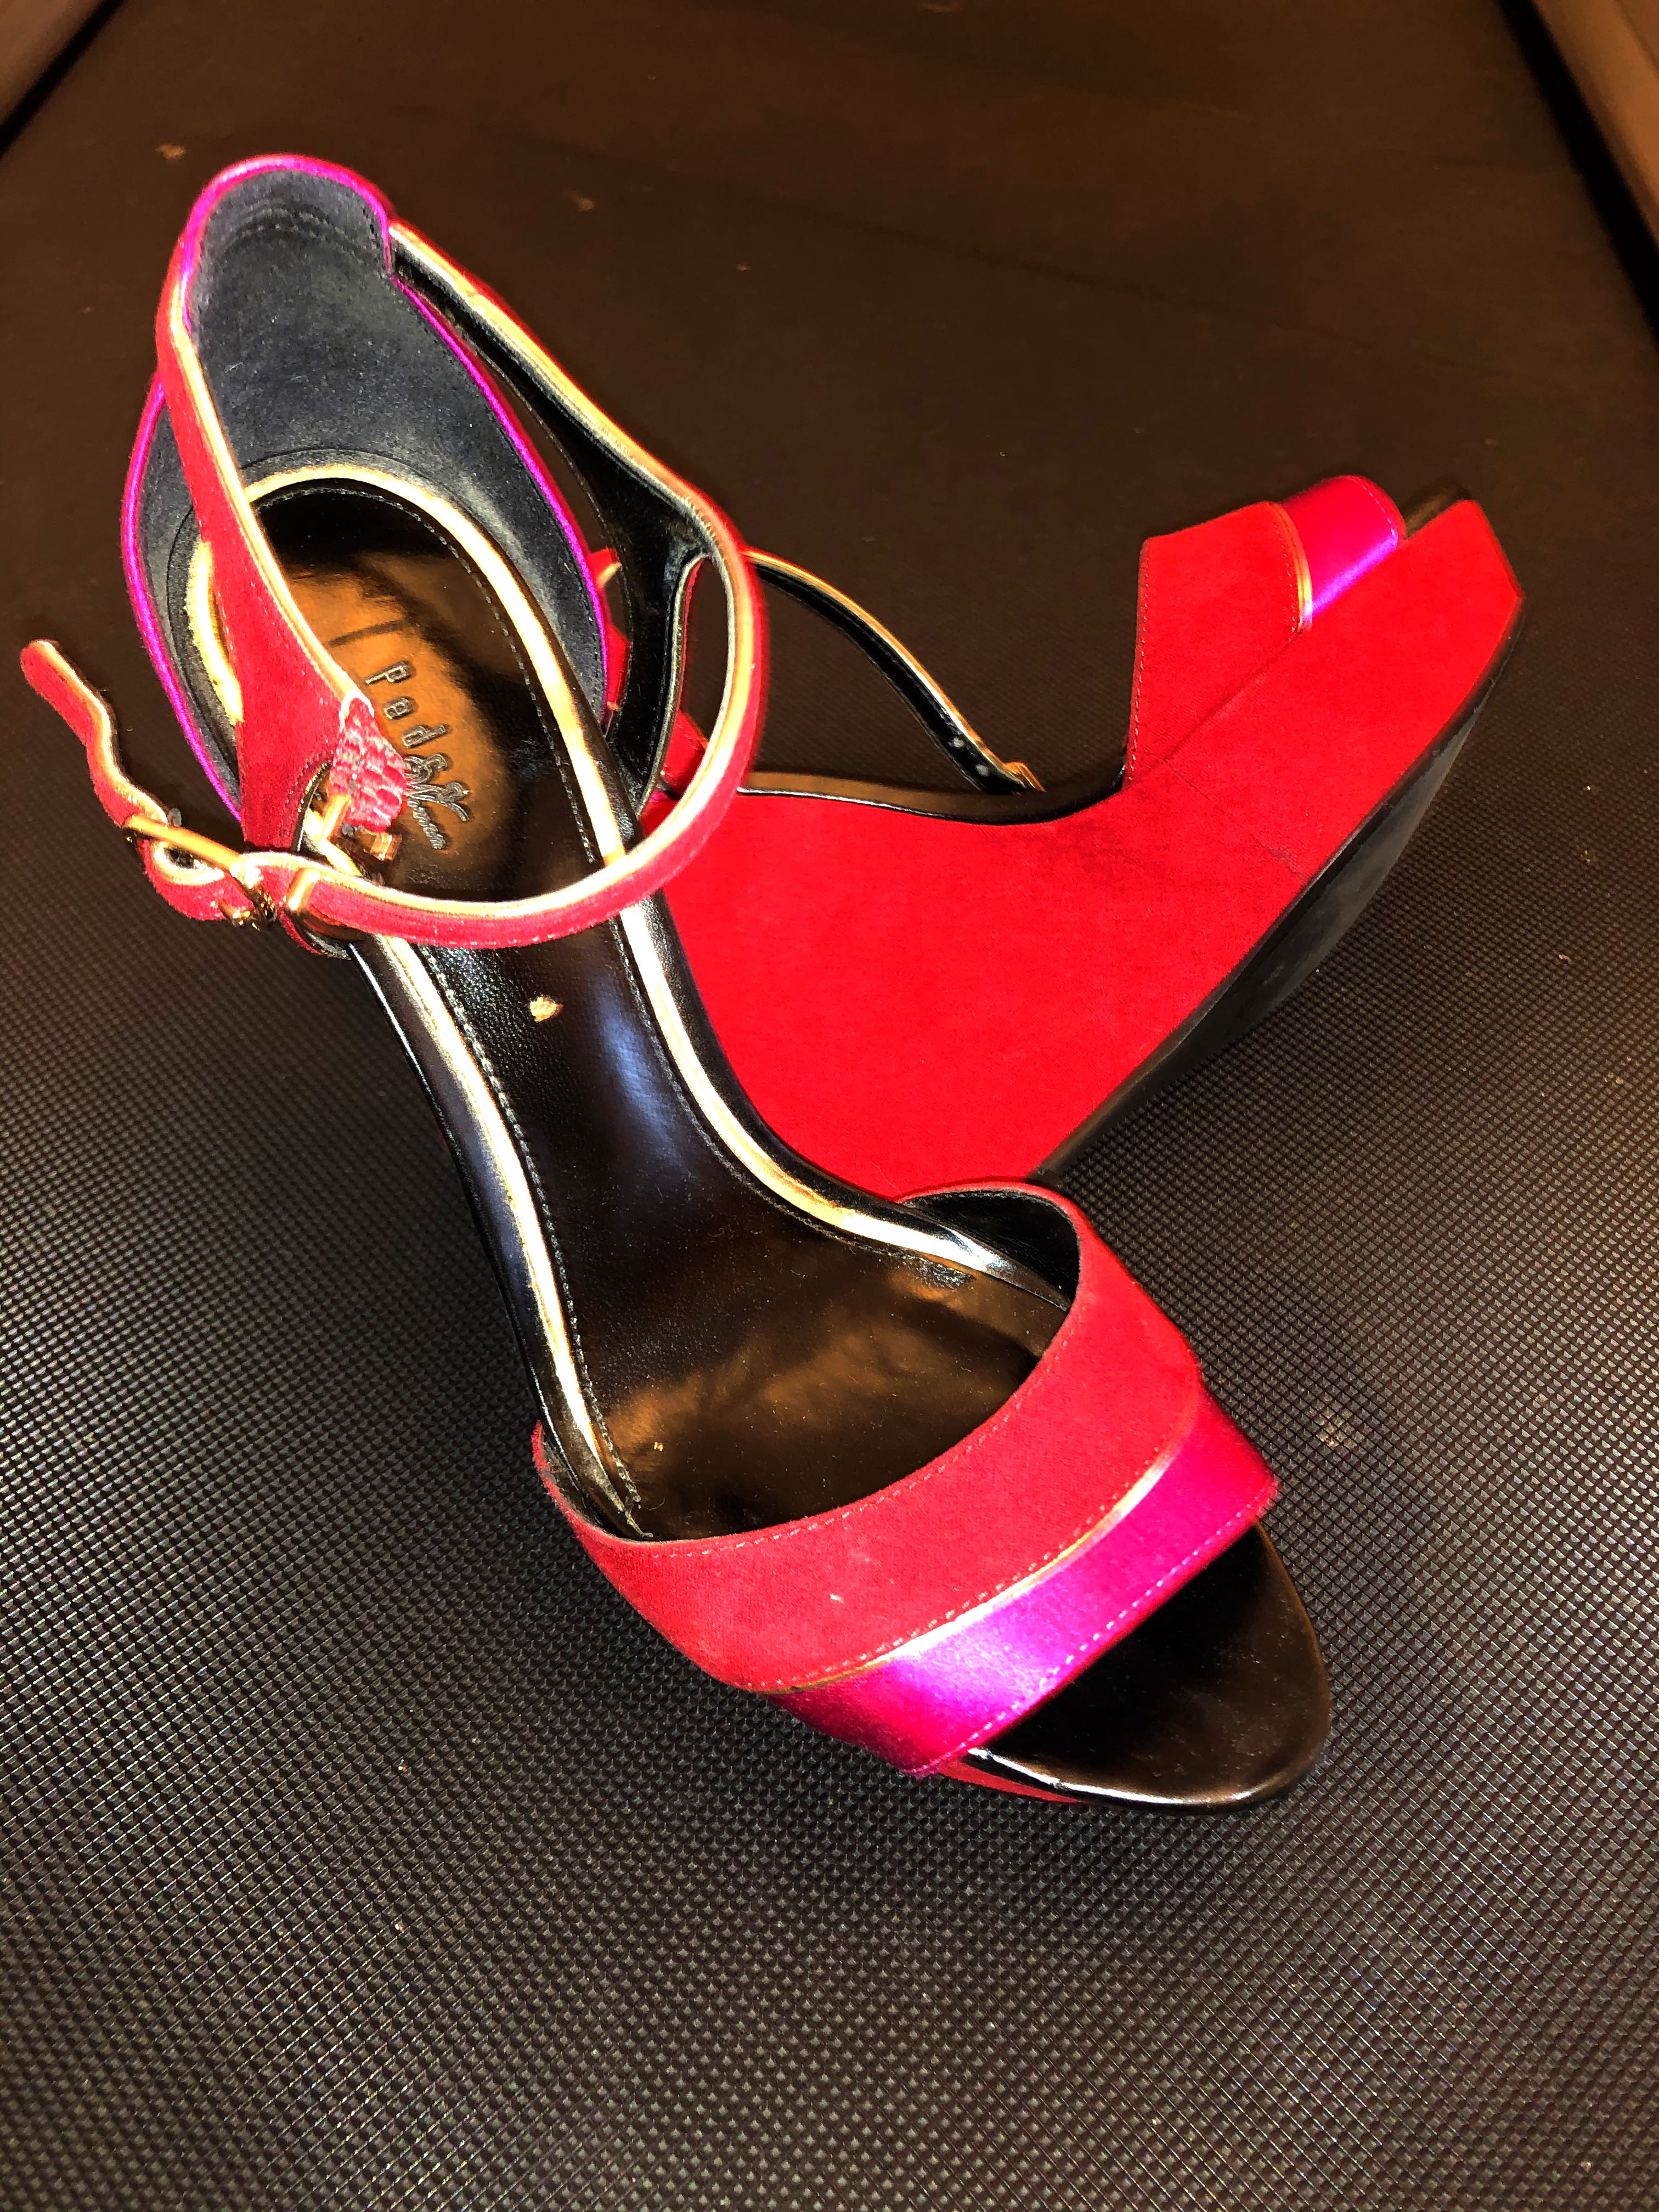 Hot pink wedges, Women's Fashion, Shoes 